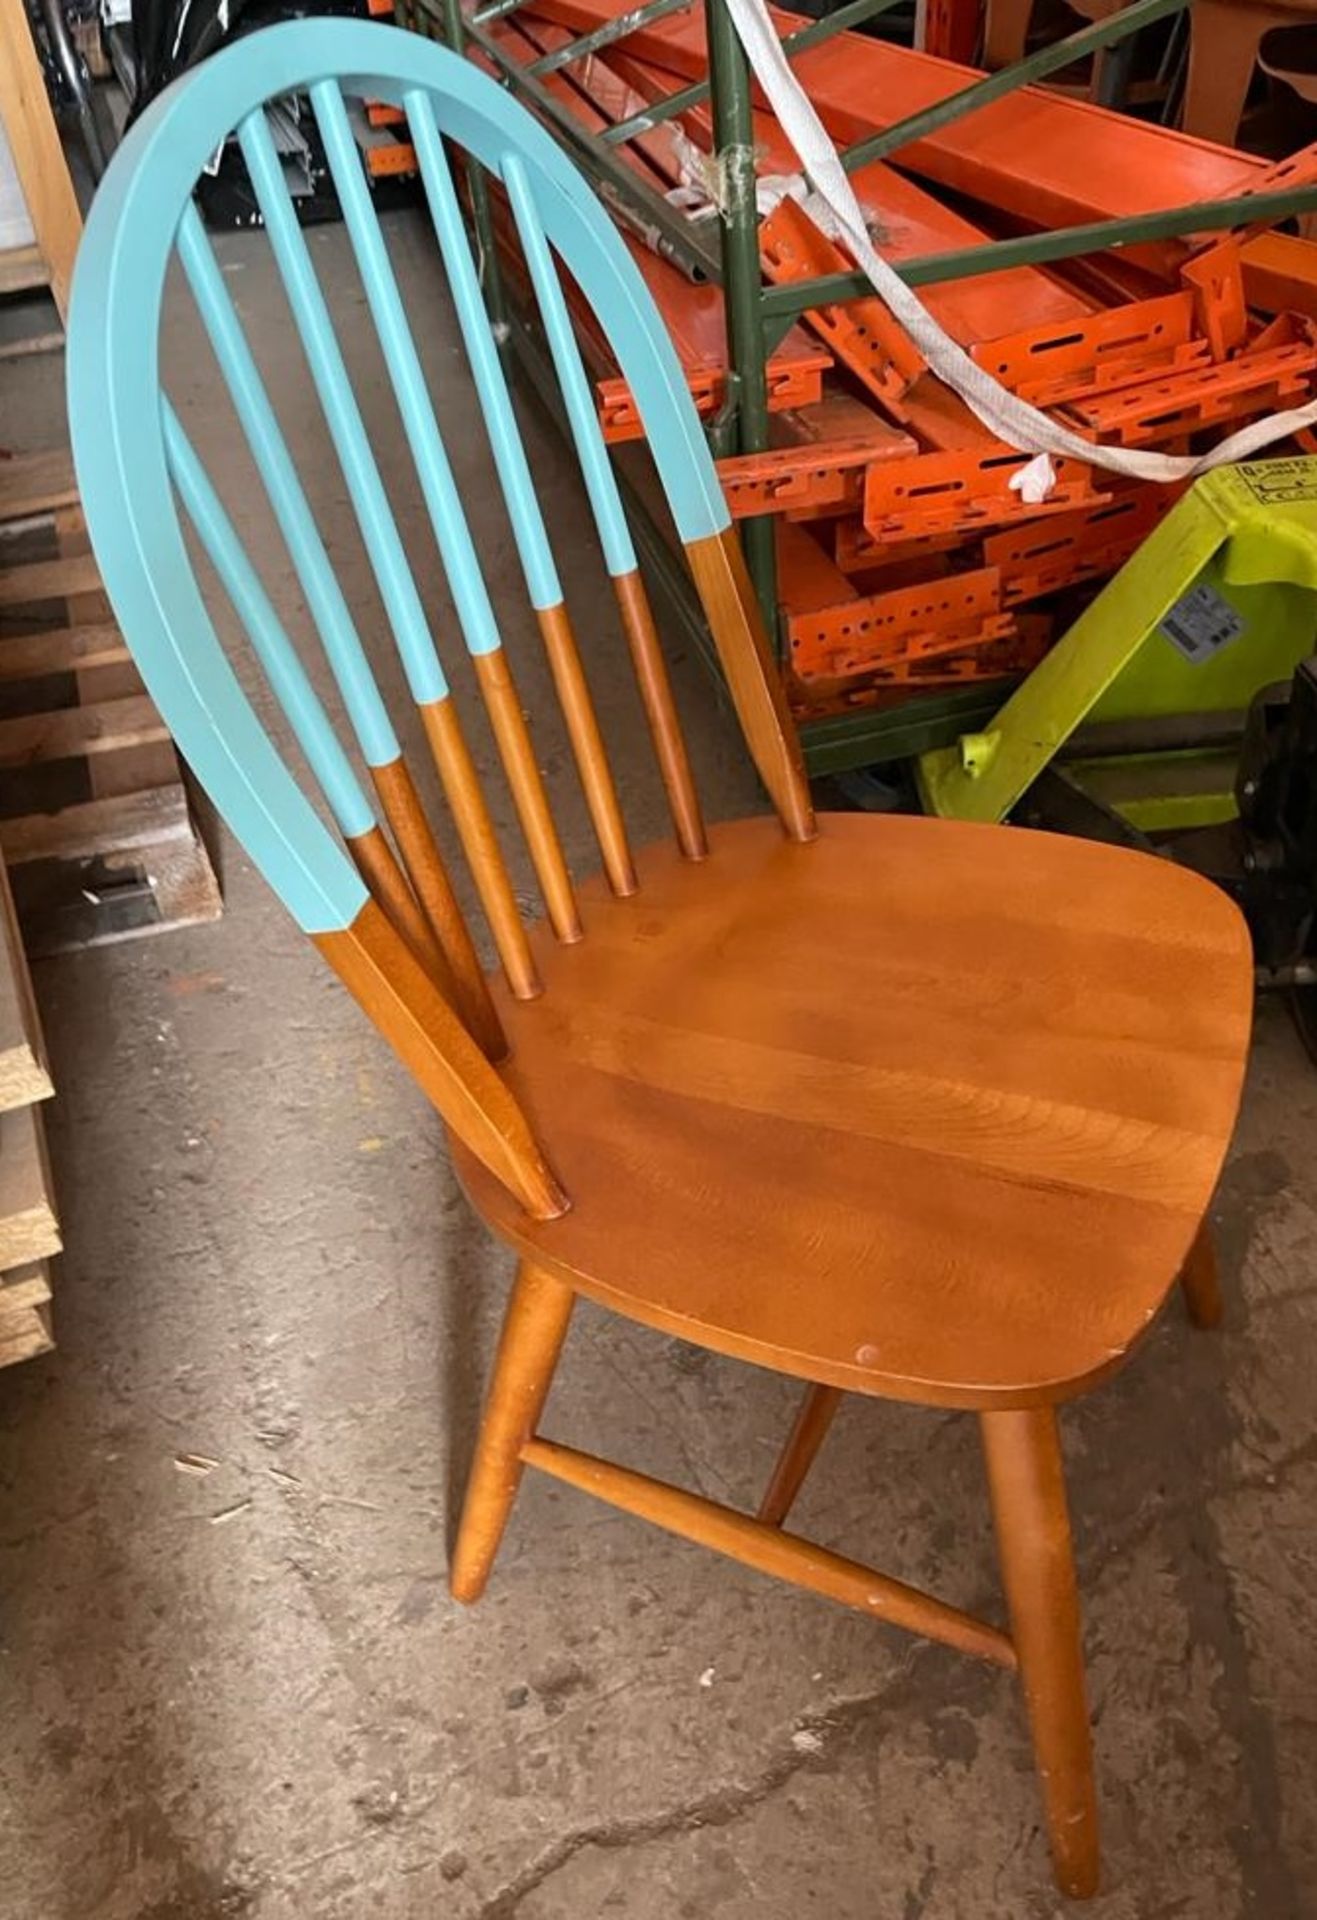 22 x Restaurant Dining Chairs - Contemporary Colourful Design With Wooden Finish and Part Painted in - Image 2 of 7